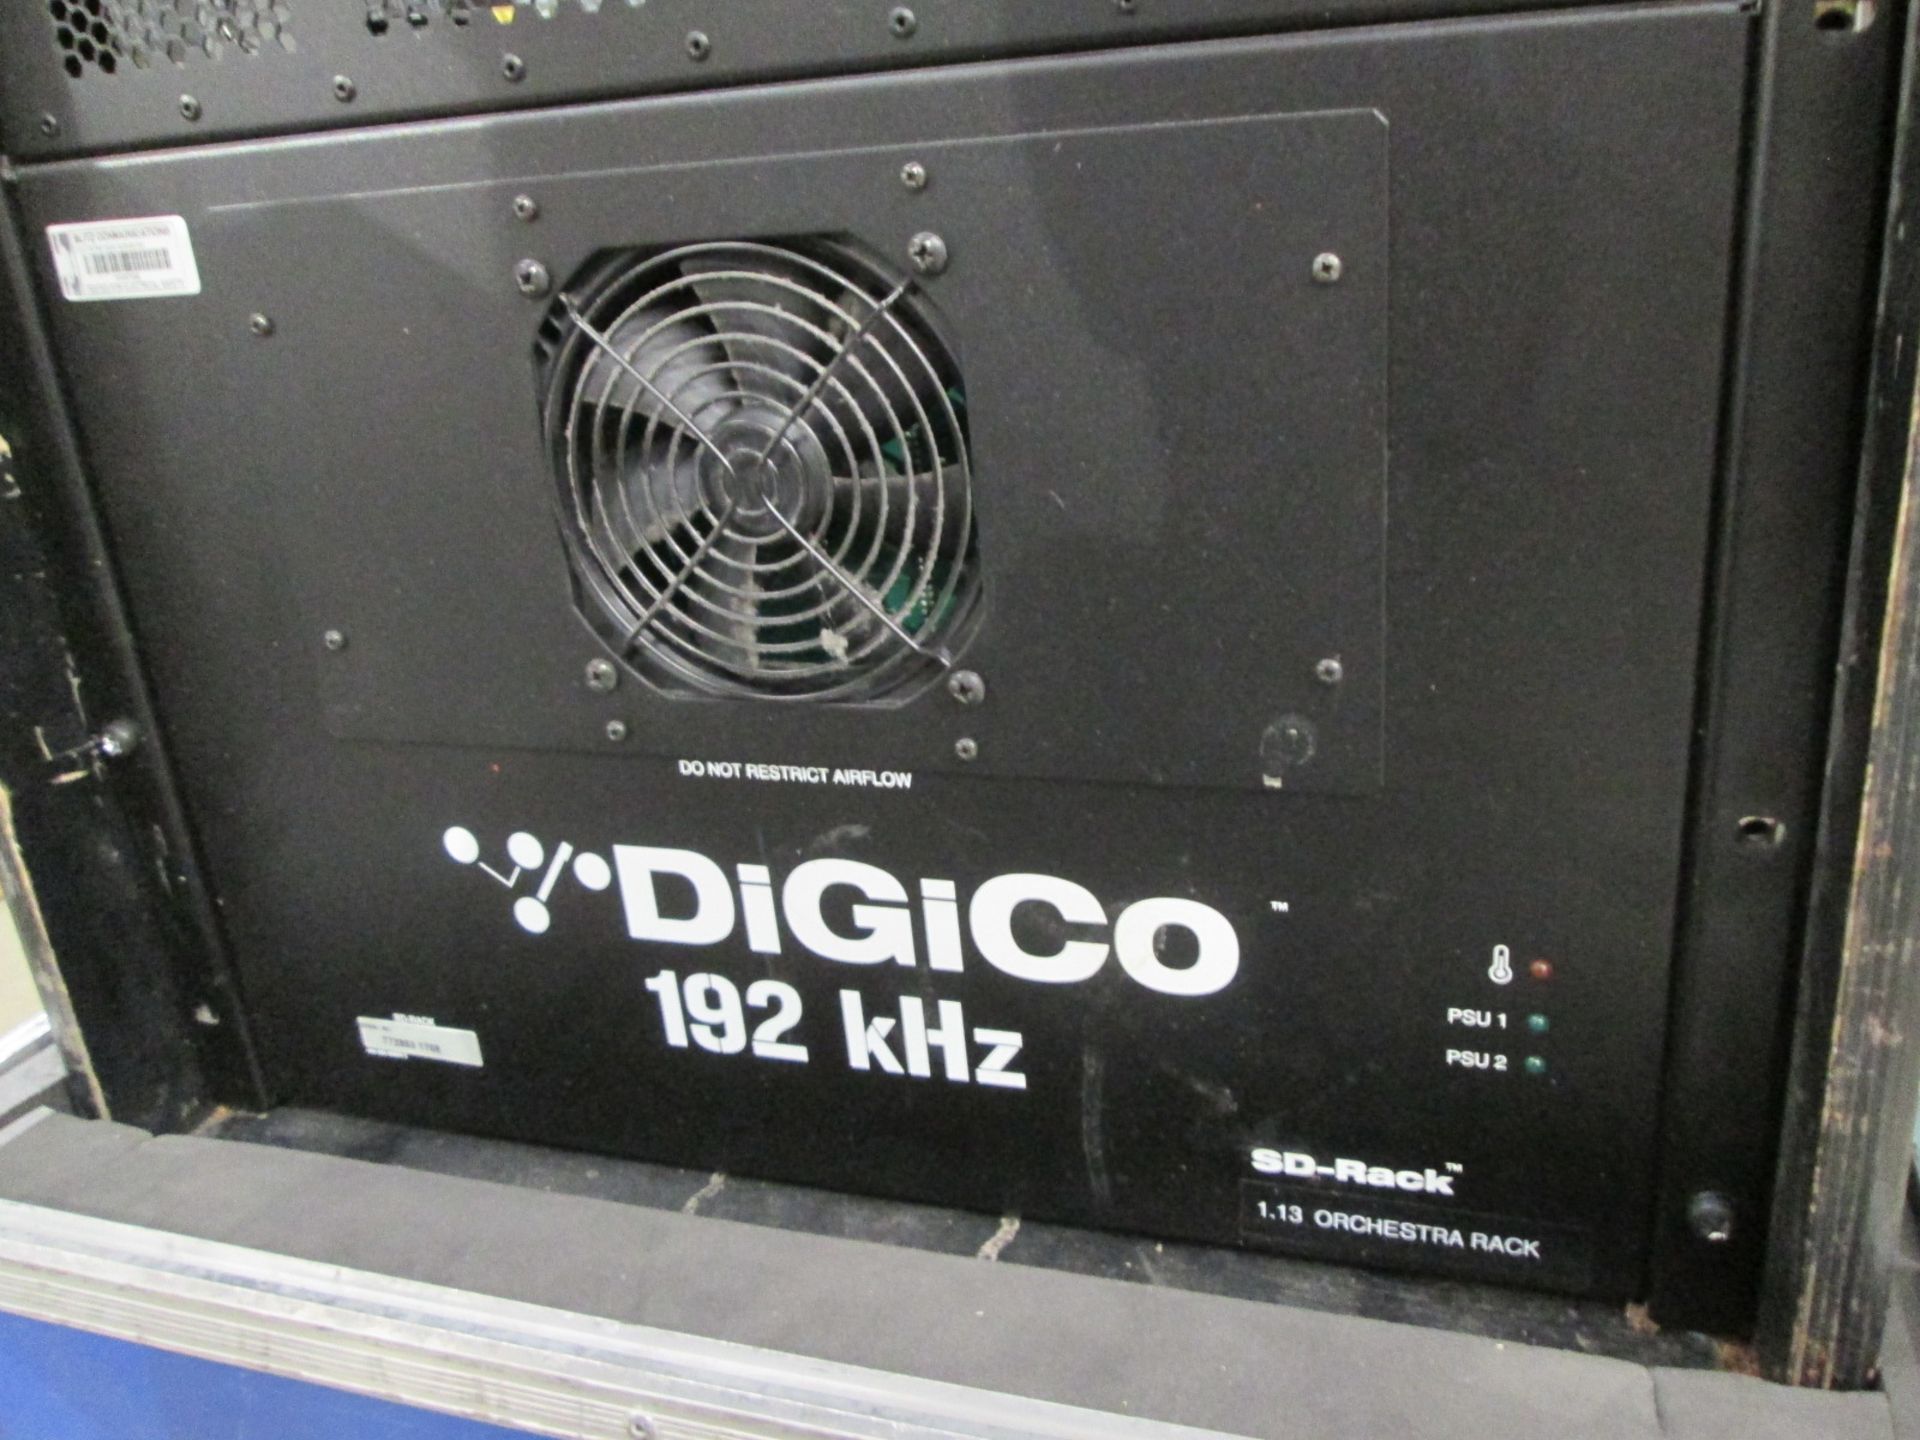 DigiCo 192 kHz SD-Rack Digital Input / Output Frame. S/N 772953 1708, Note 1 x card removed but - Image 2 of 7